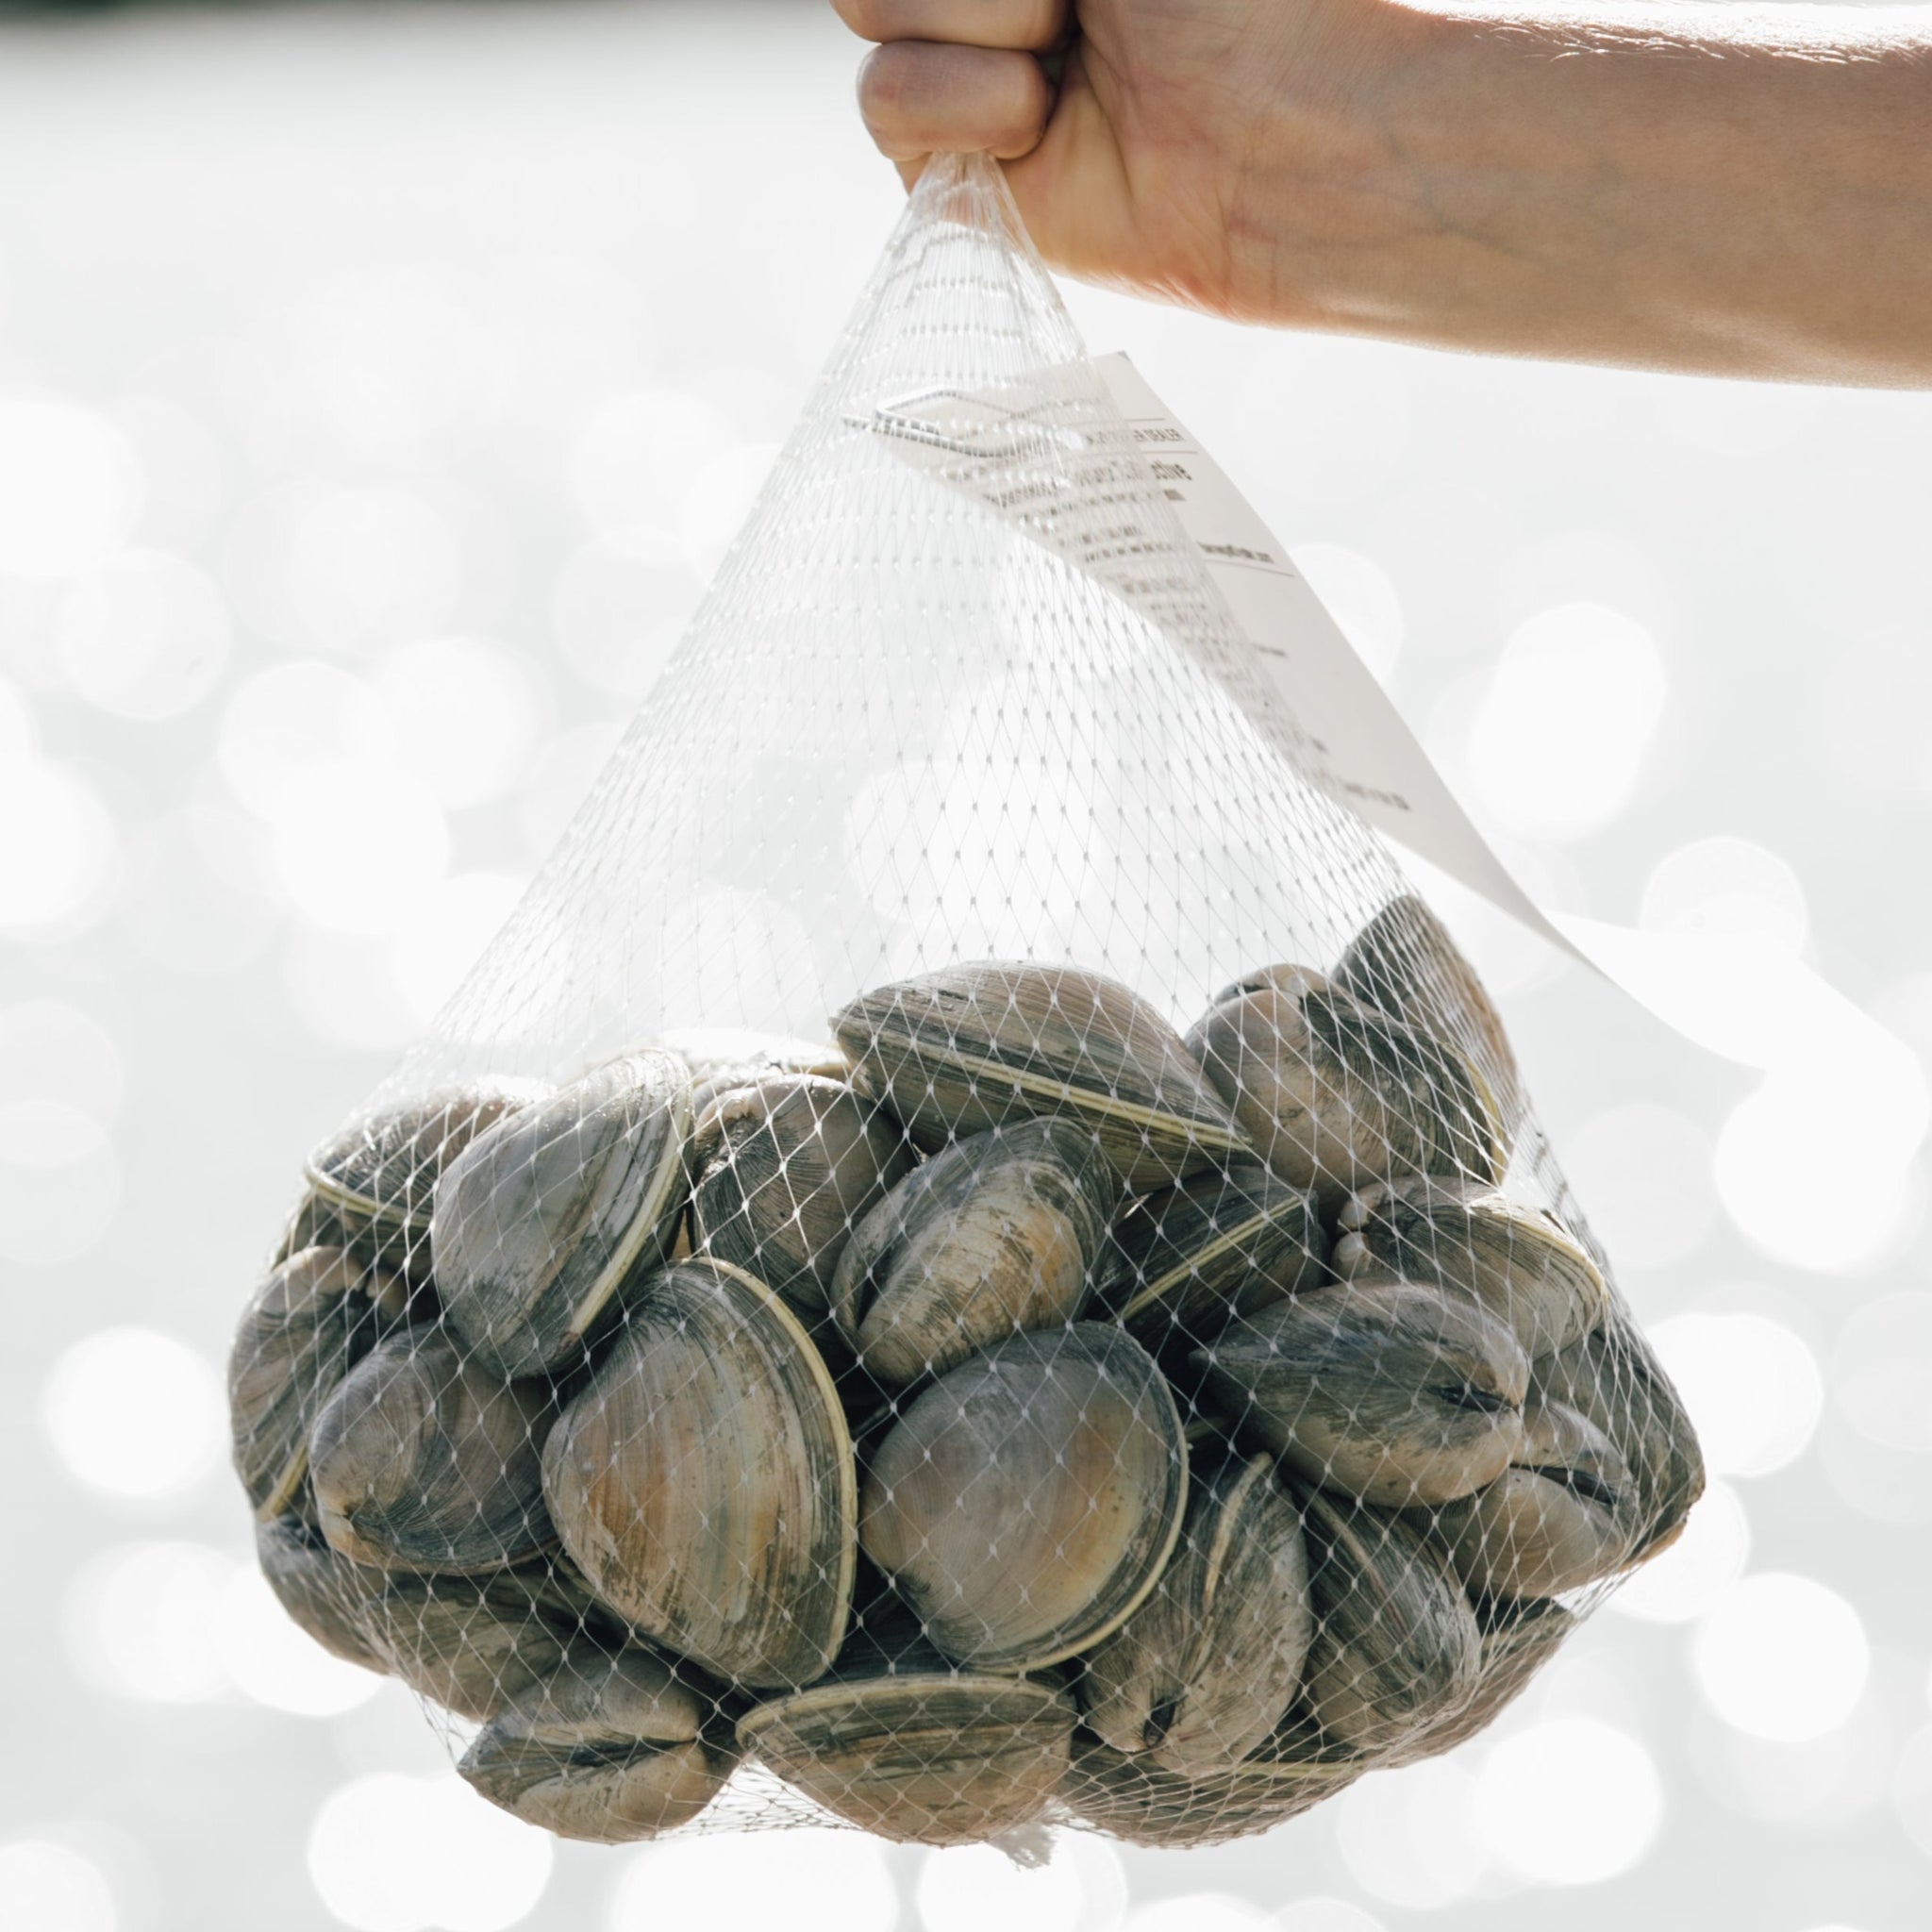 SALE: 25 Clams for $13!